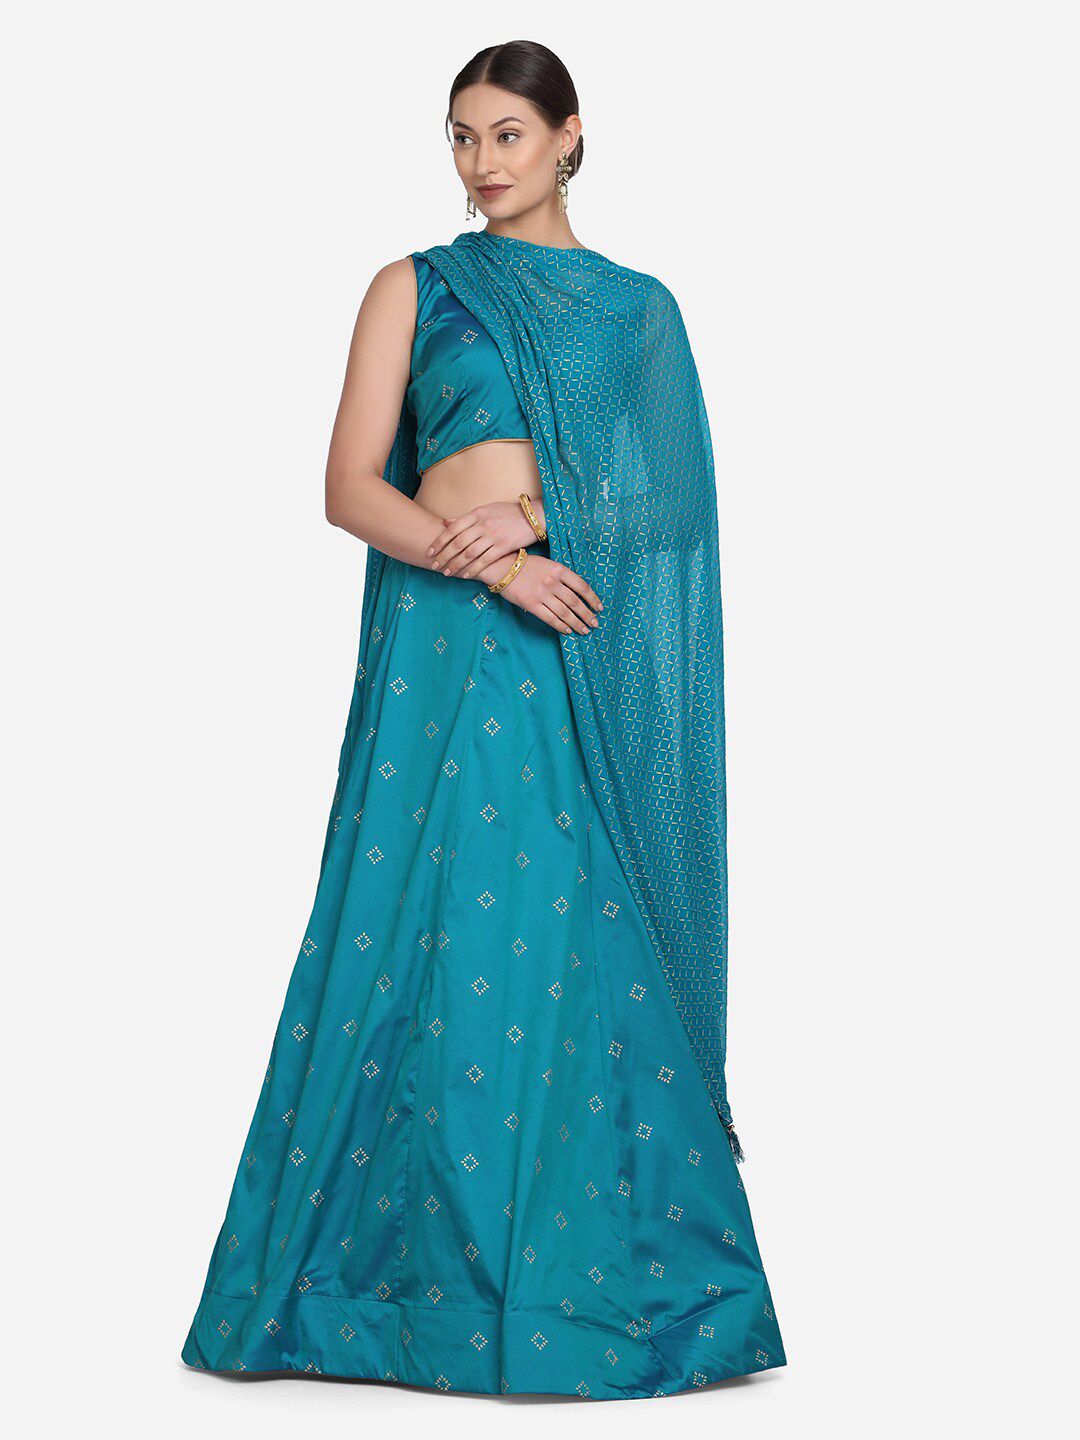 Warthy Ent Turquoise Blue Printed Foil Print Semi-Stitched Lehenga & Unstitched Blouse With Dupatta Price in India